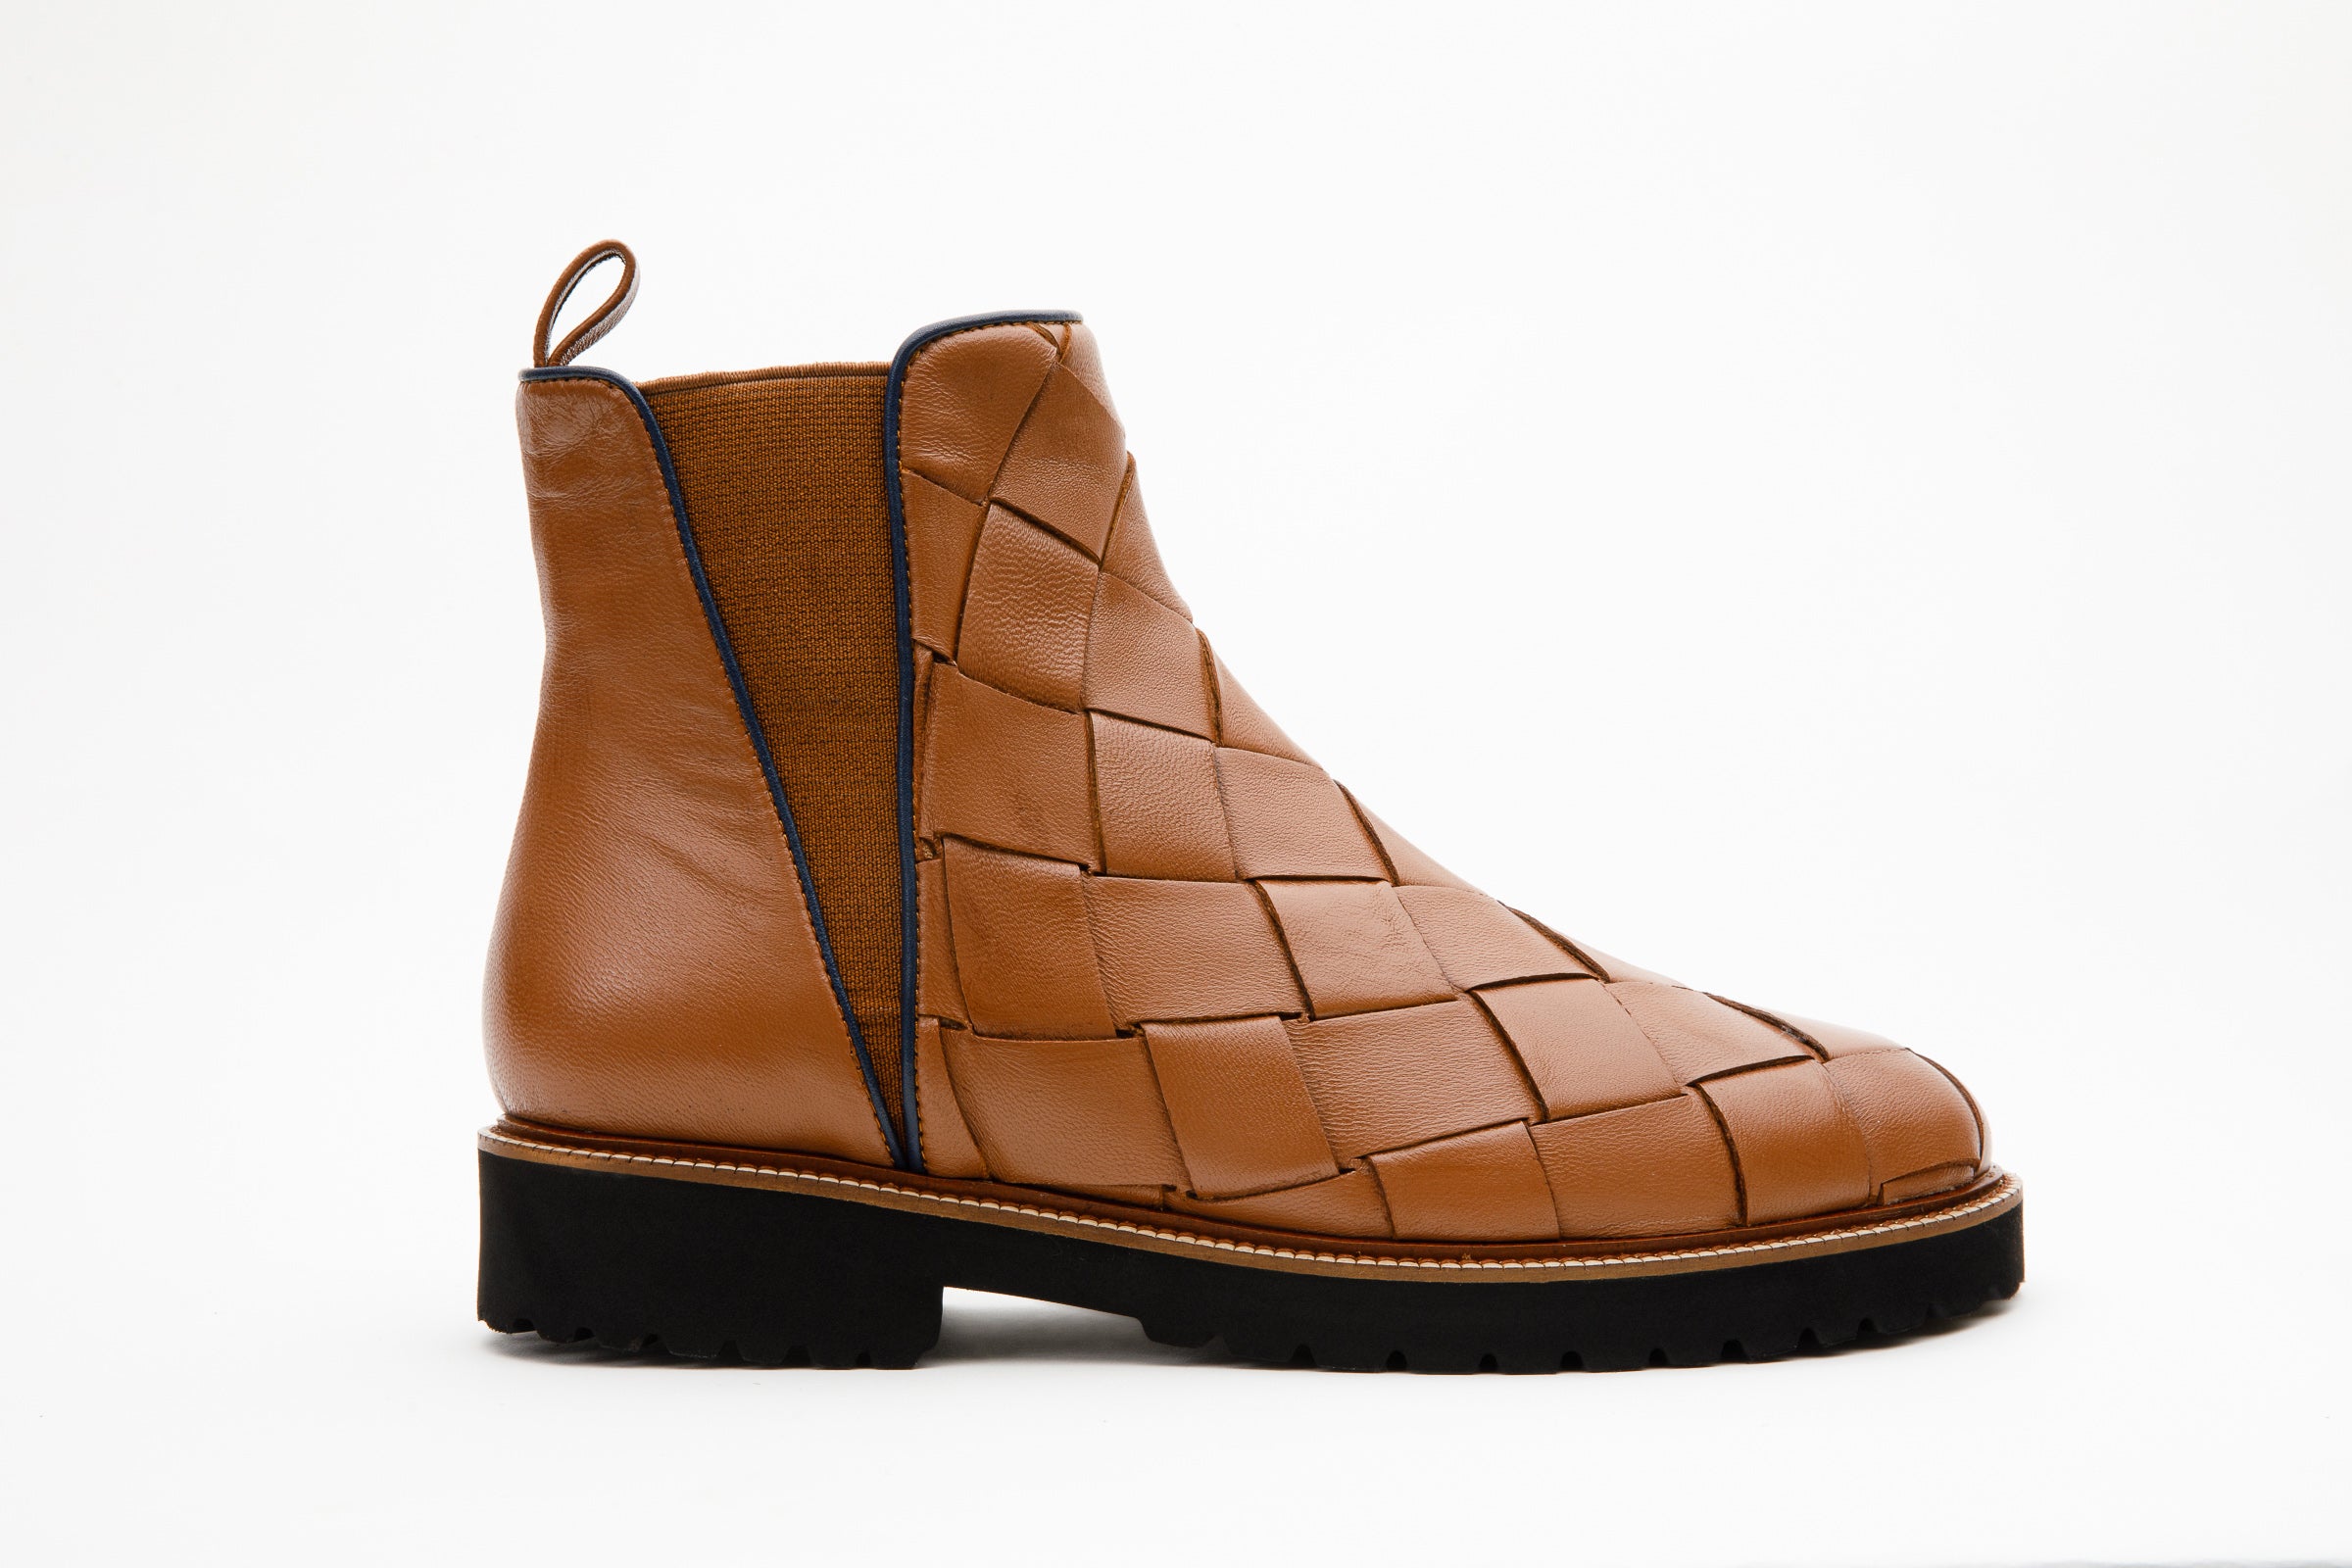 The Luisina Brown Handwoven Leather Ankle Boot Final Sale!